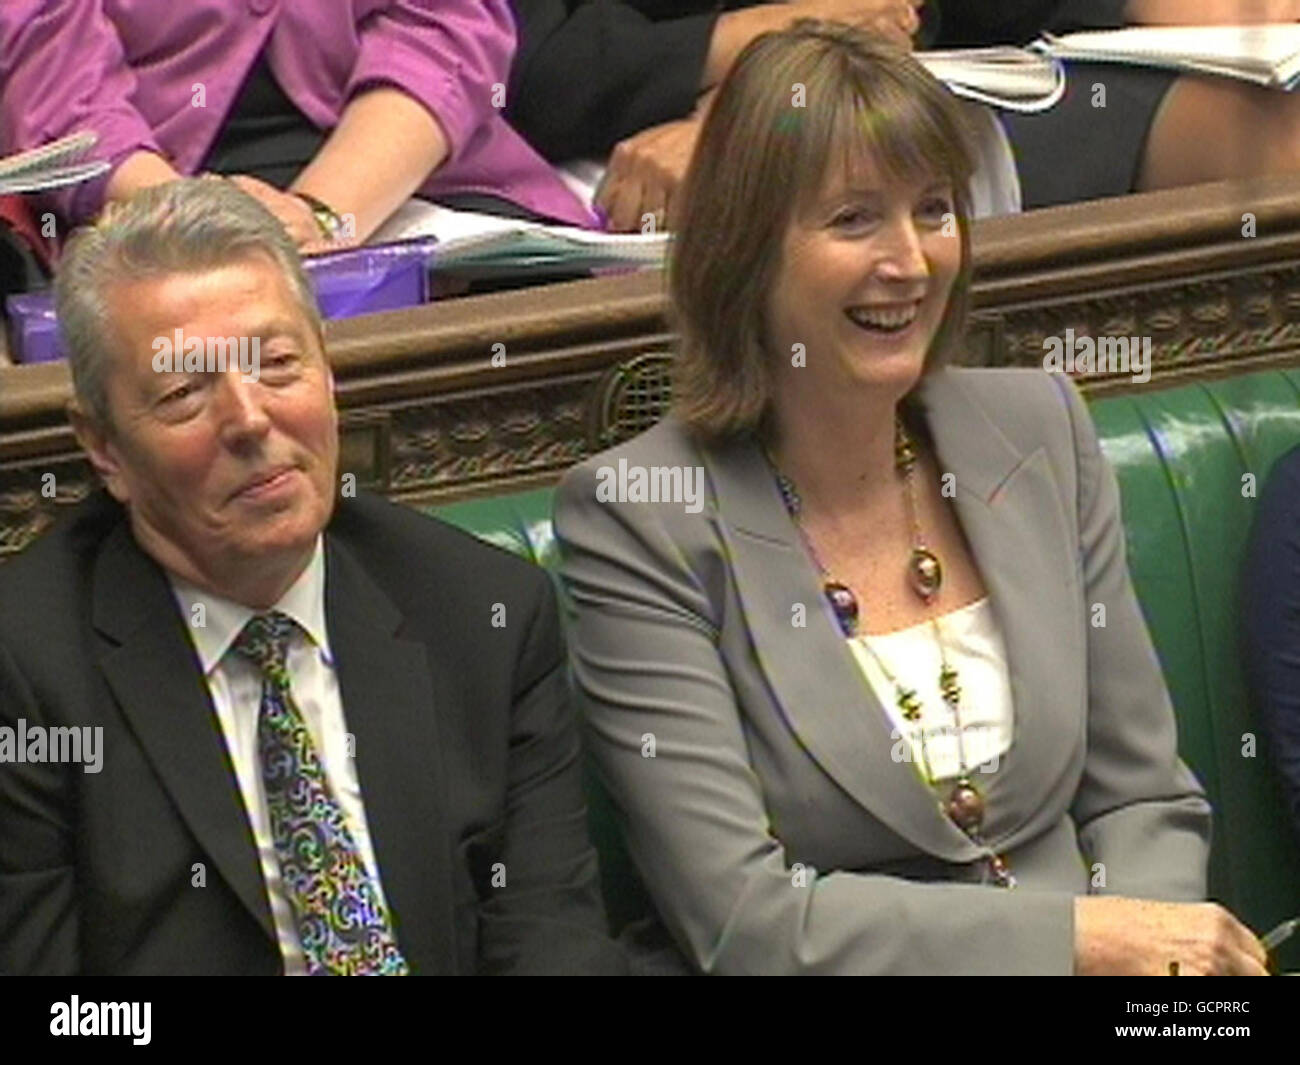 (left to right) Shadow Home Secretary Alan Johnson and acting leader of the Labour Party Harriet Harman during Prime Minister's Questions in the House of Commons, London. Stock Photo